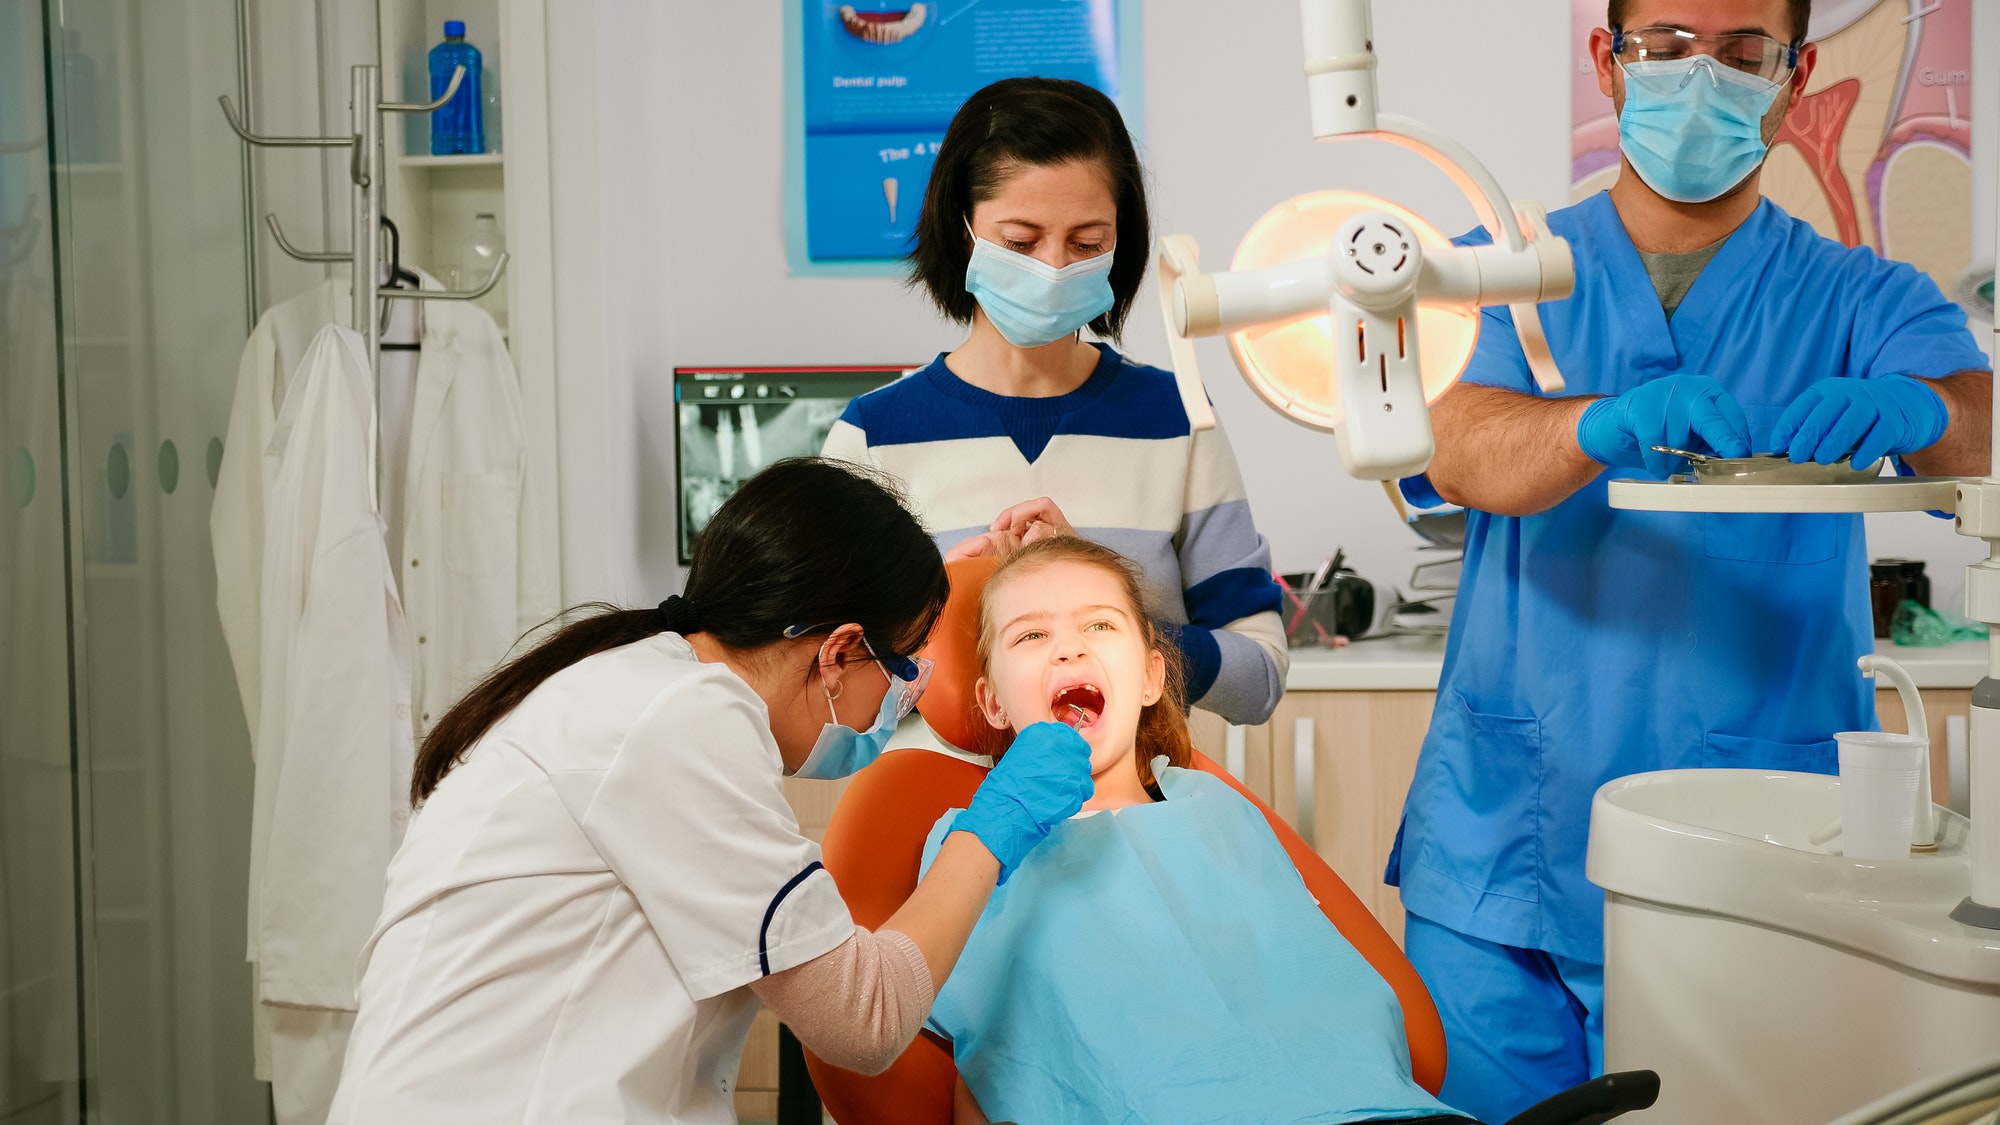 Dentistry doctor speaking to kid sitting on stomatological chair